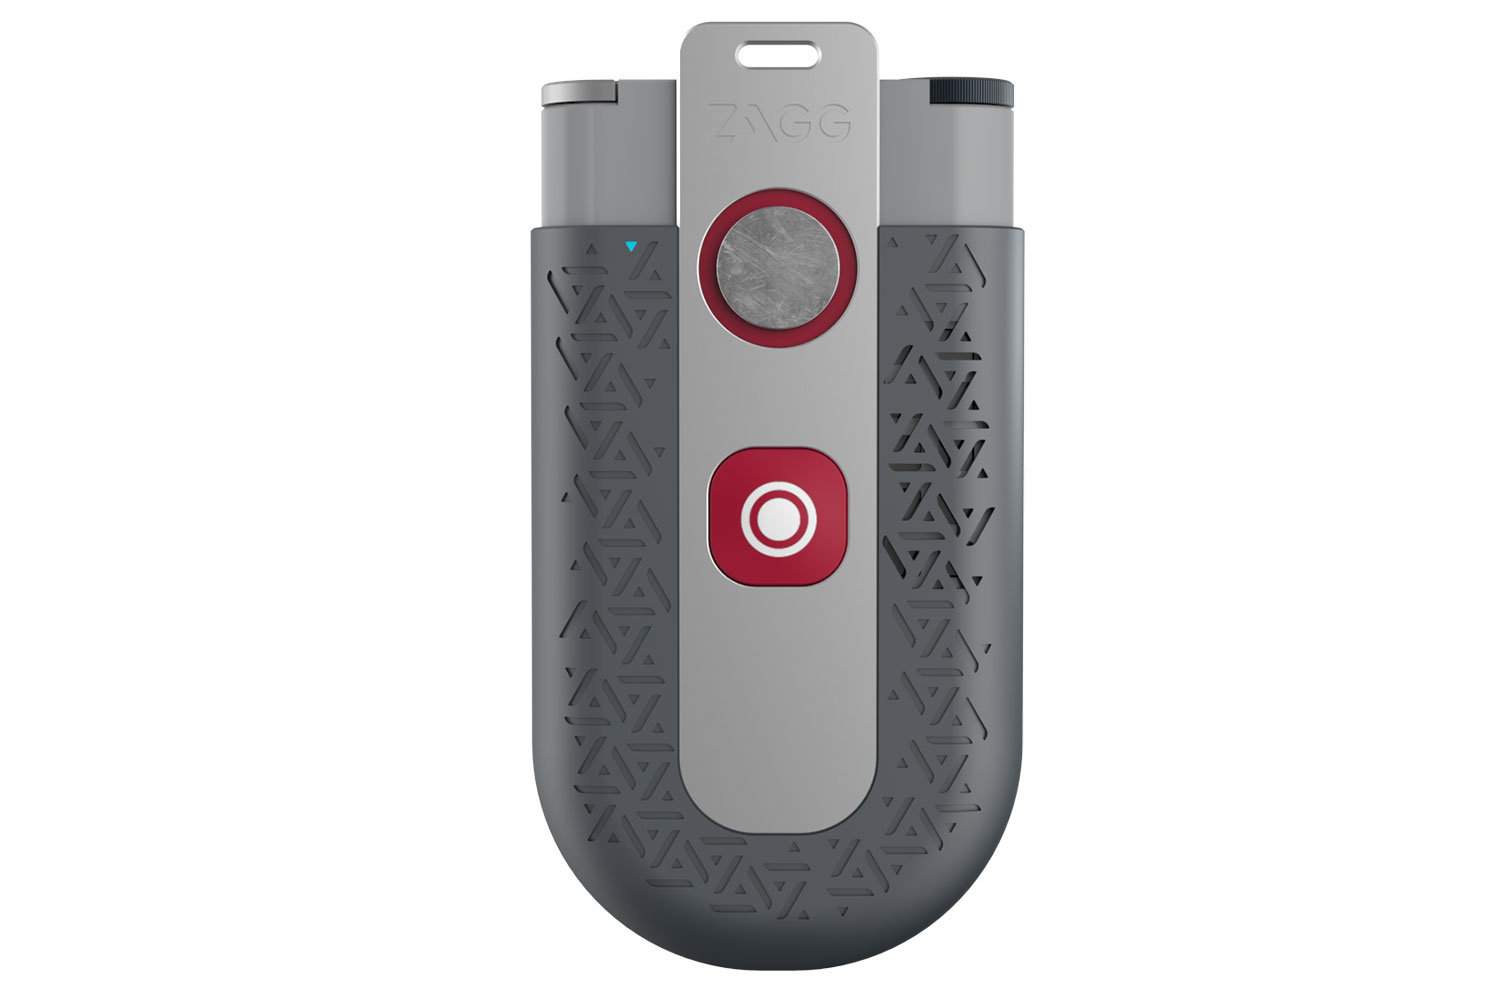 zagg now cam is a pocket camcorder that doubles as mini bluetooth speaker 003